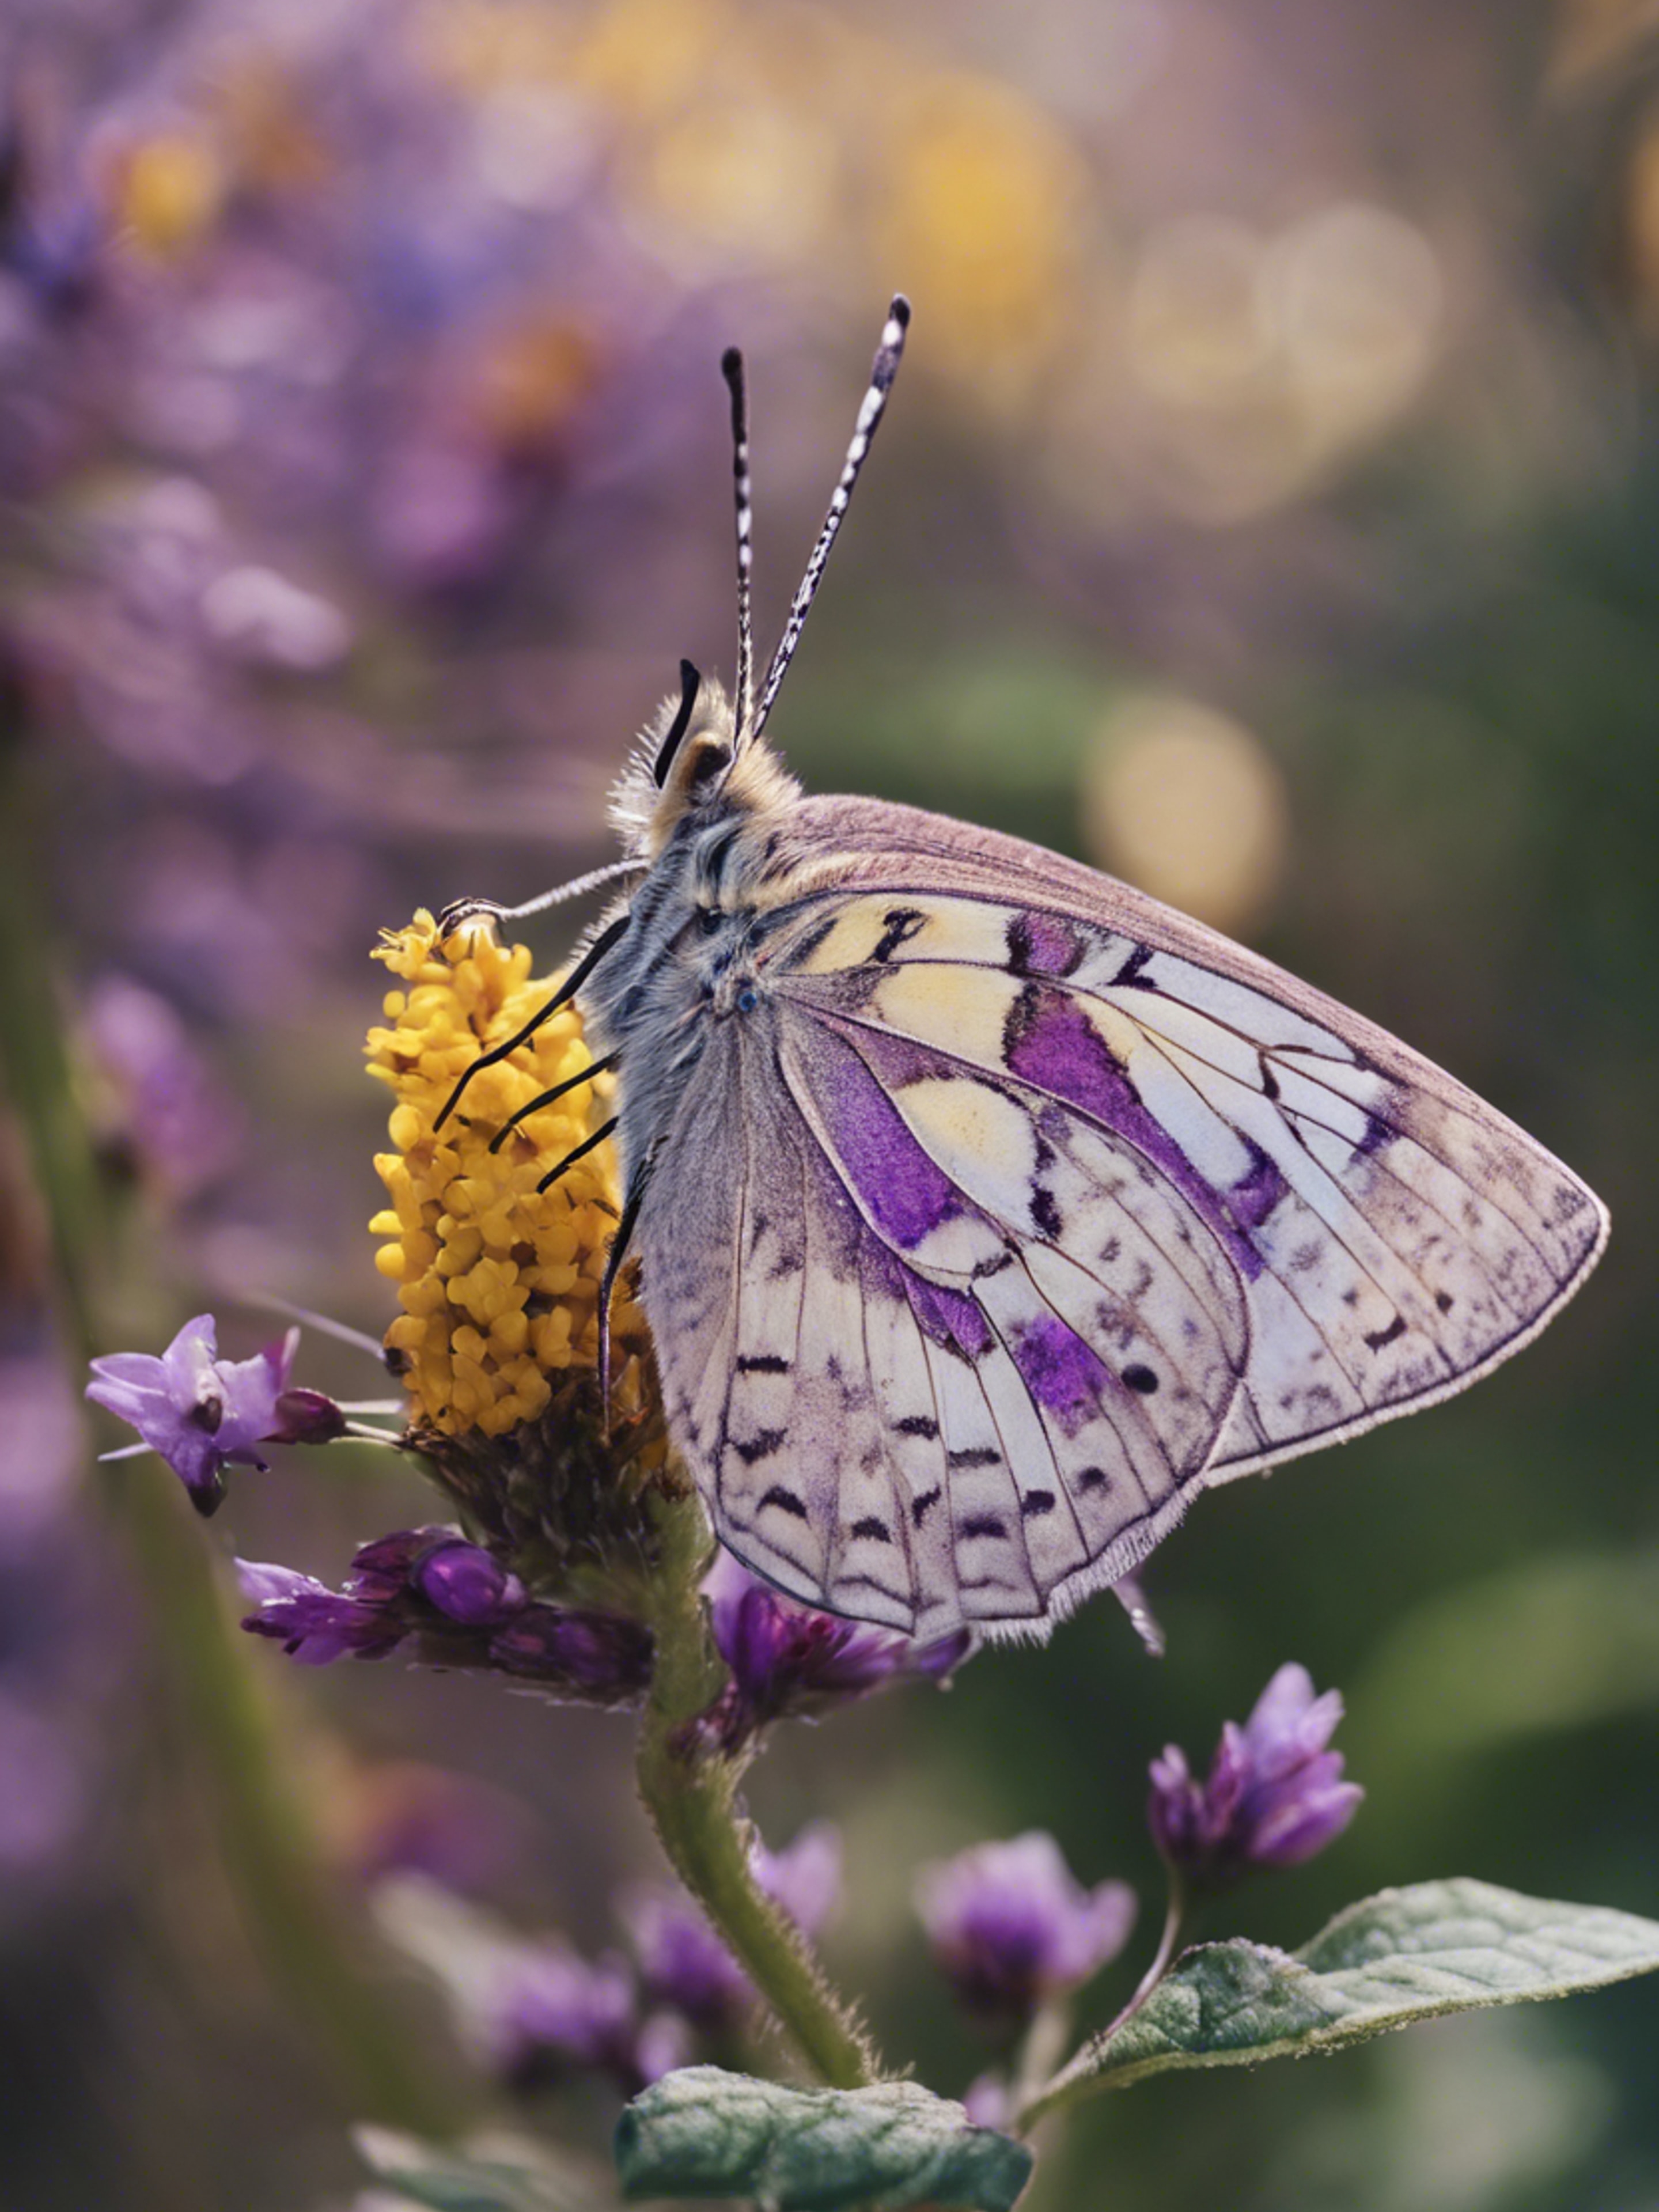 A beautiful butterfly with detailed purple and yellow wings resting on a blooming flower. Тапет[3e976ae7be264a5da695]